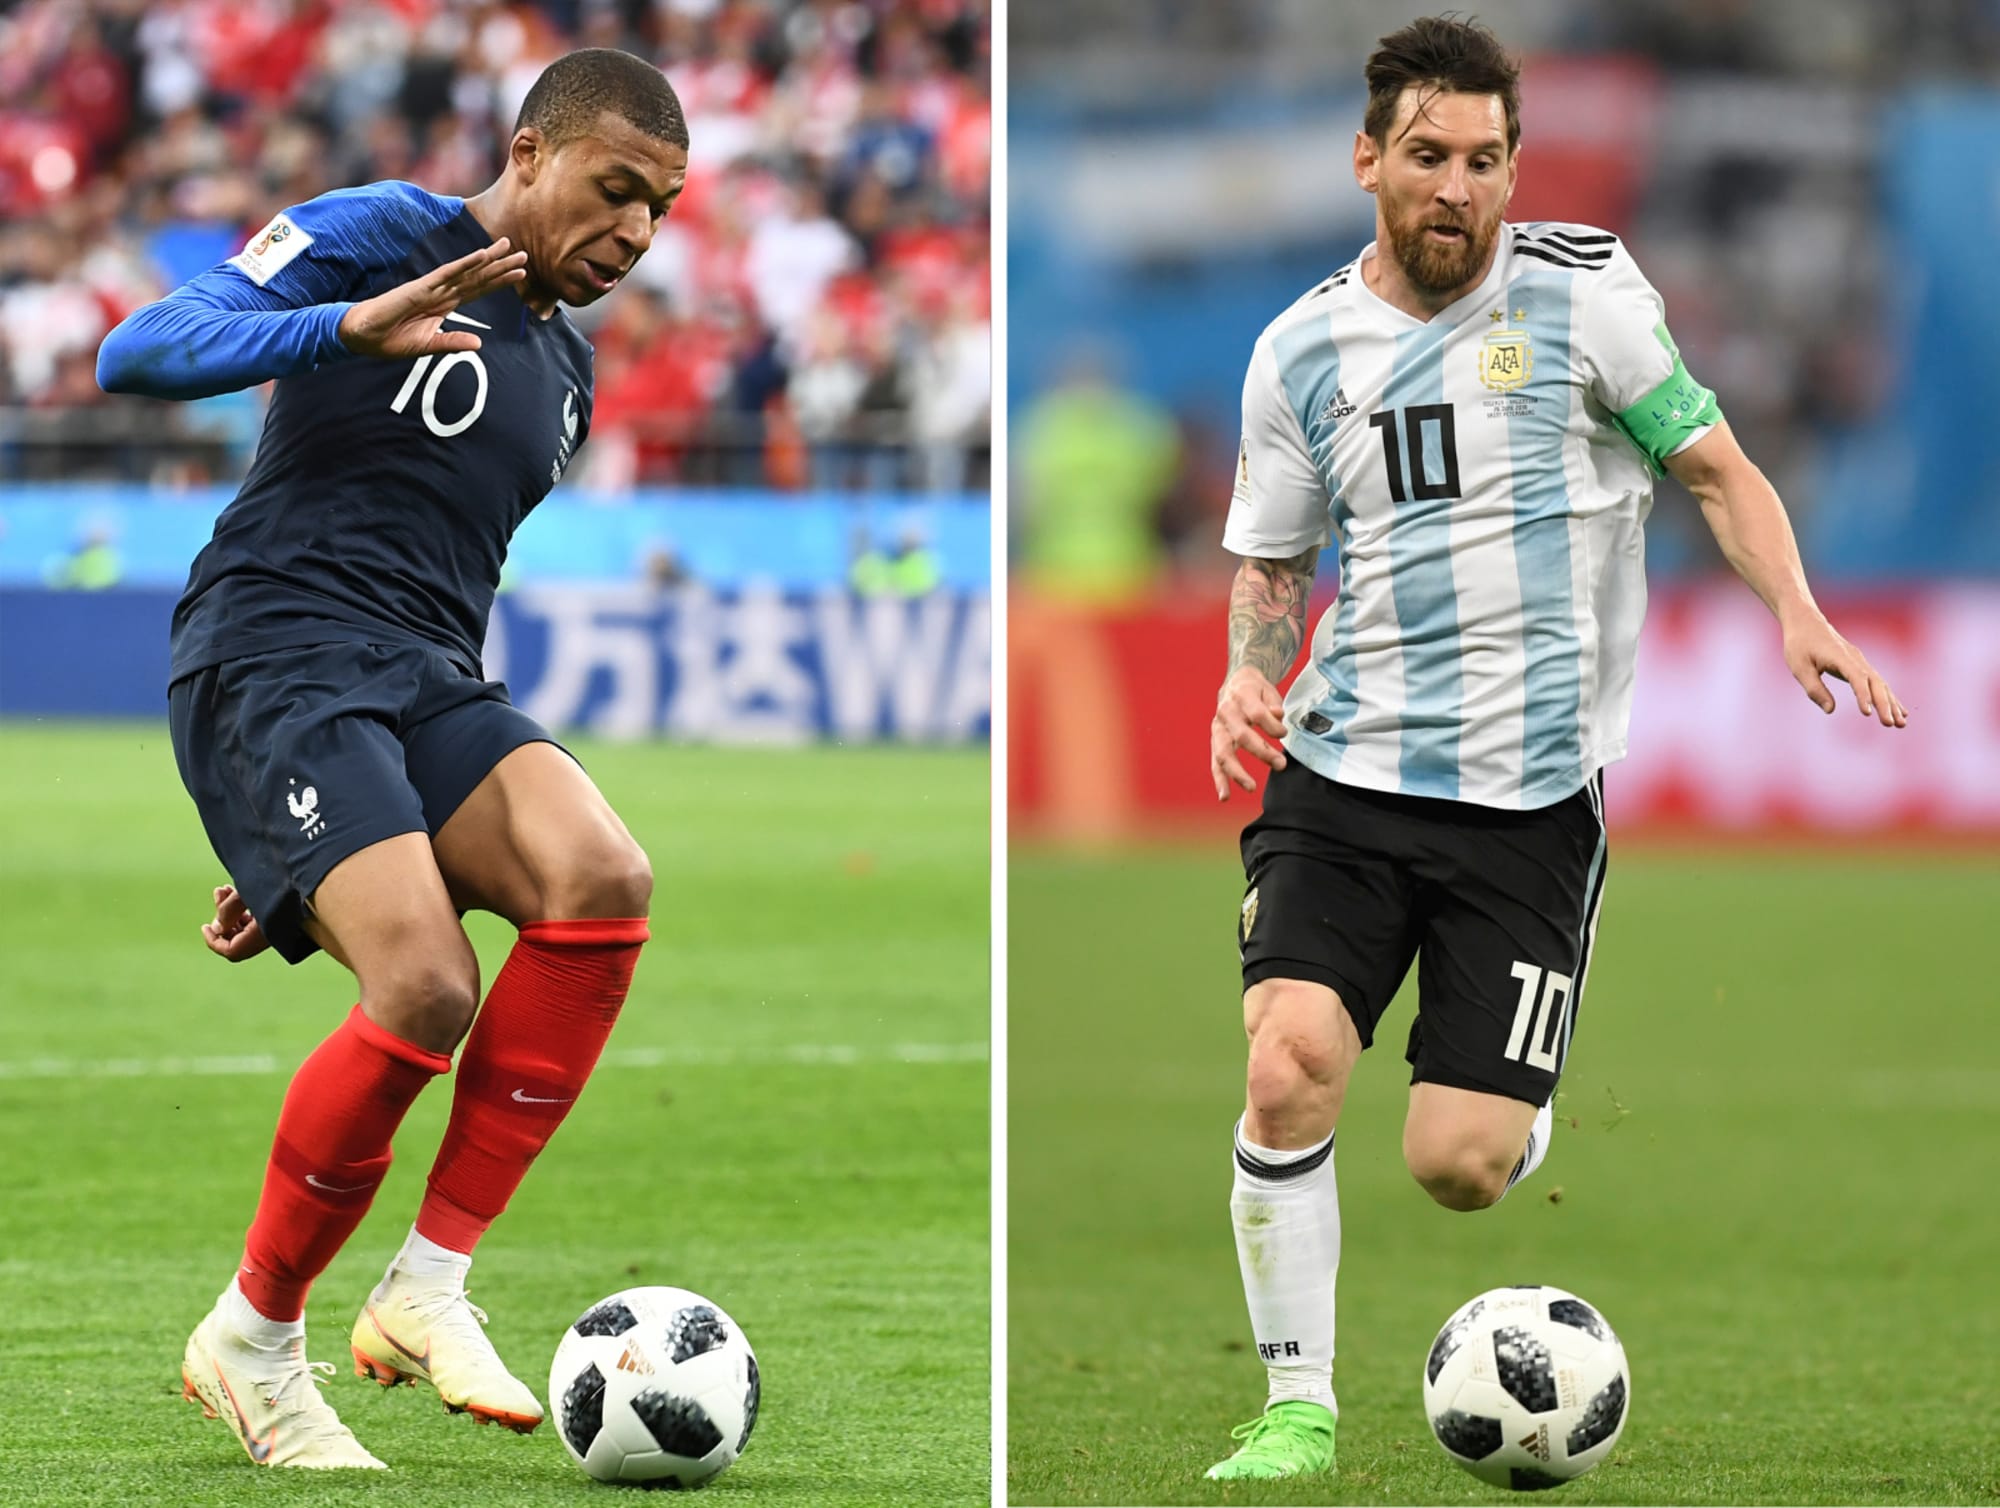 Photo of World Cup 2022 final preview: 3 things ahead of Argentina vs. France